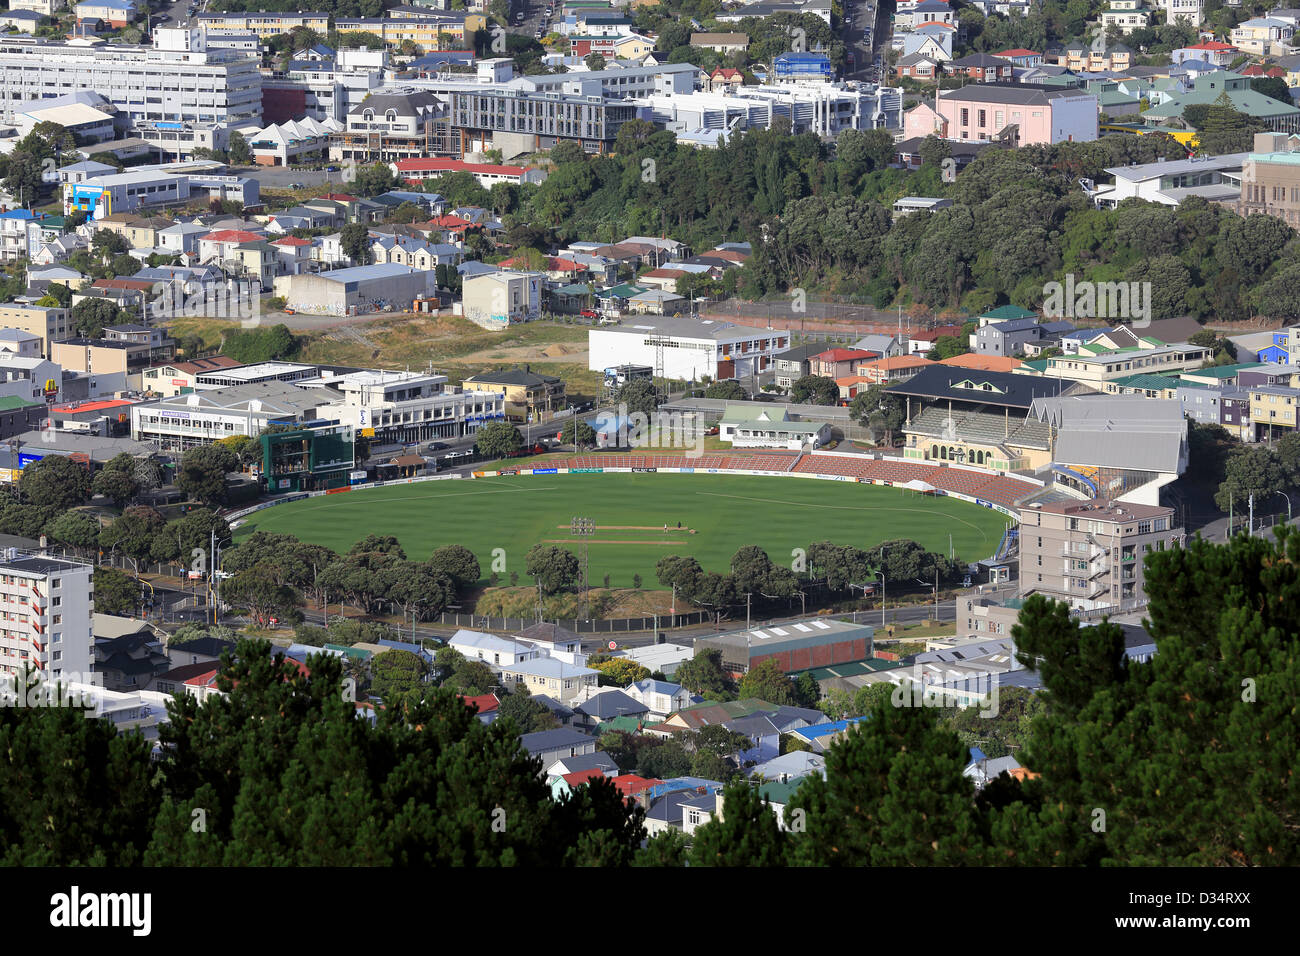 View of the Basin Reserve international cricket oval in Wellington, New Zealand Stock Photo